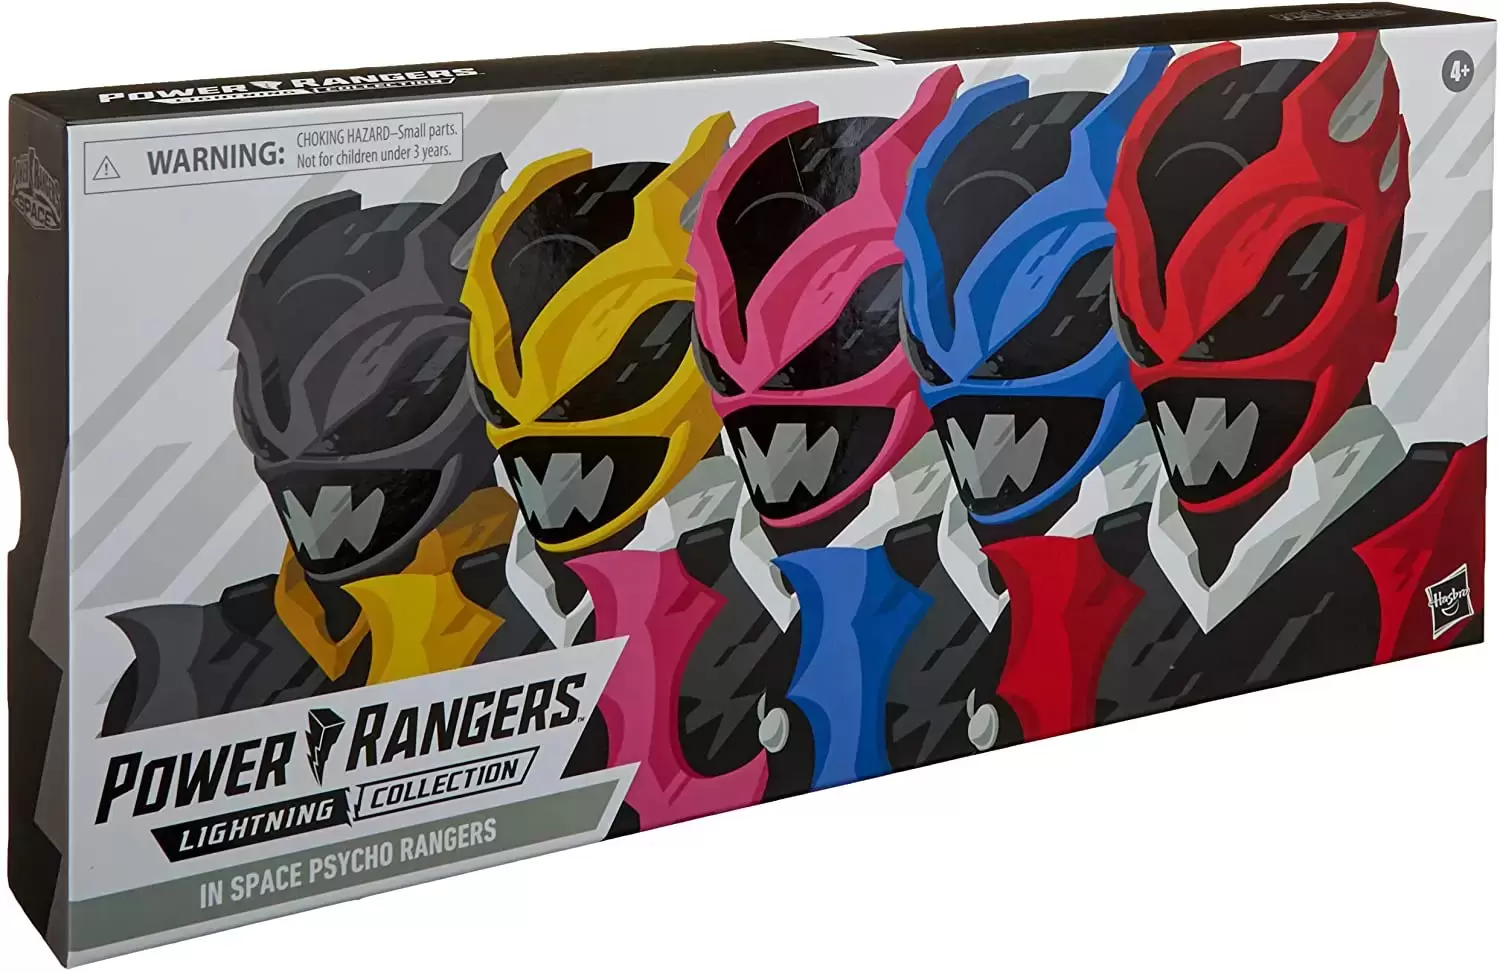 Power Rangers Hasbro - Lightning Collection - In Space Psycho Rangers 5-Pack